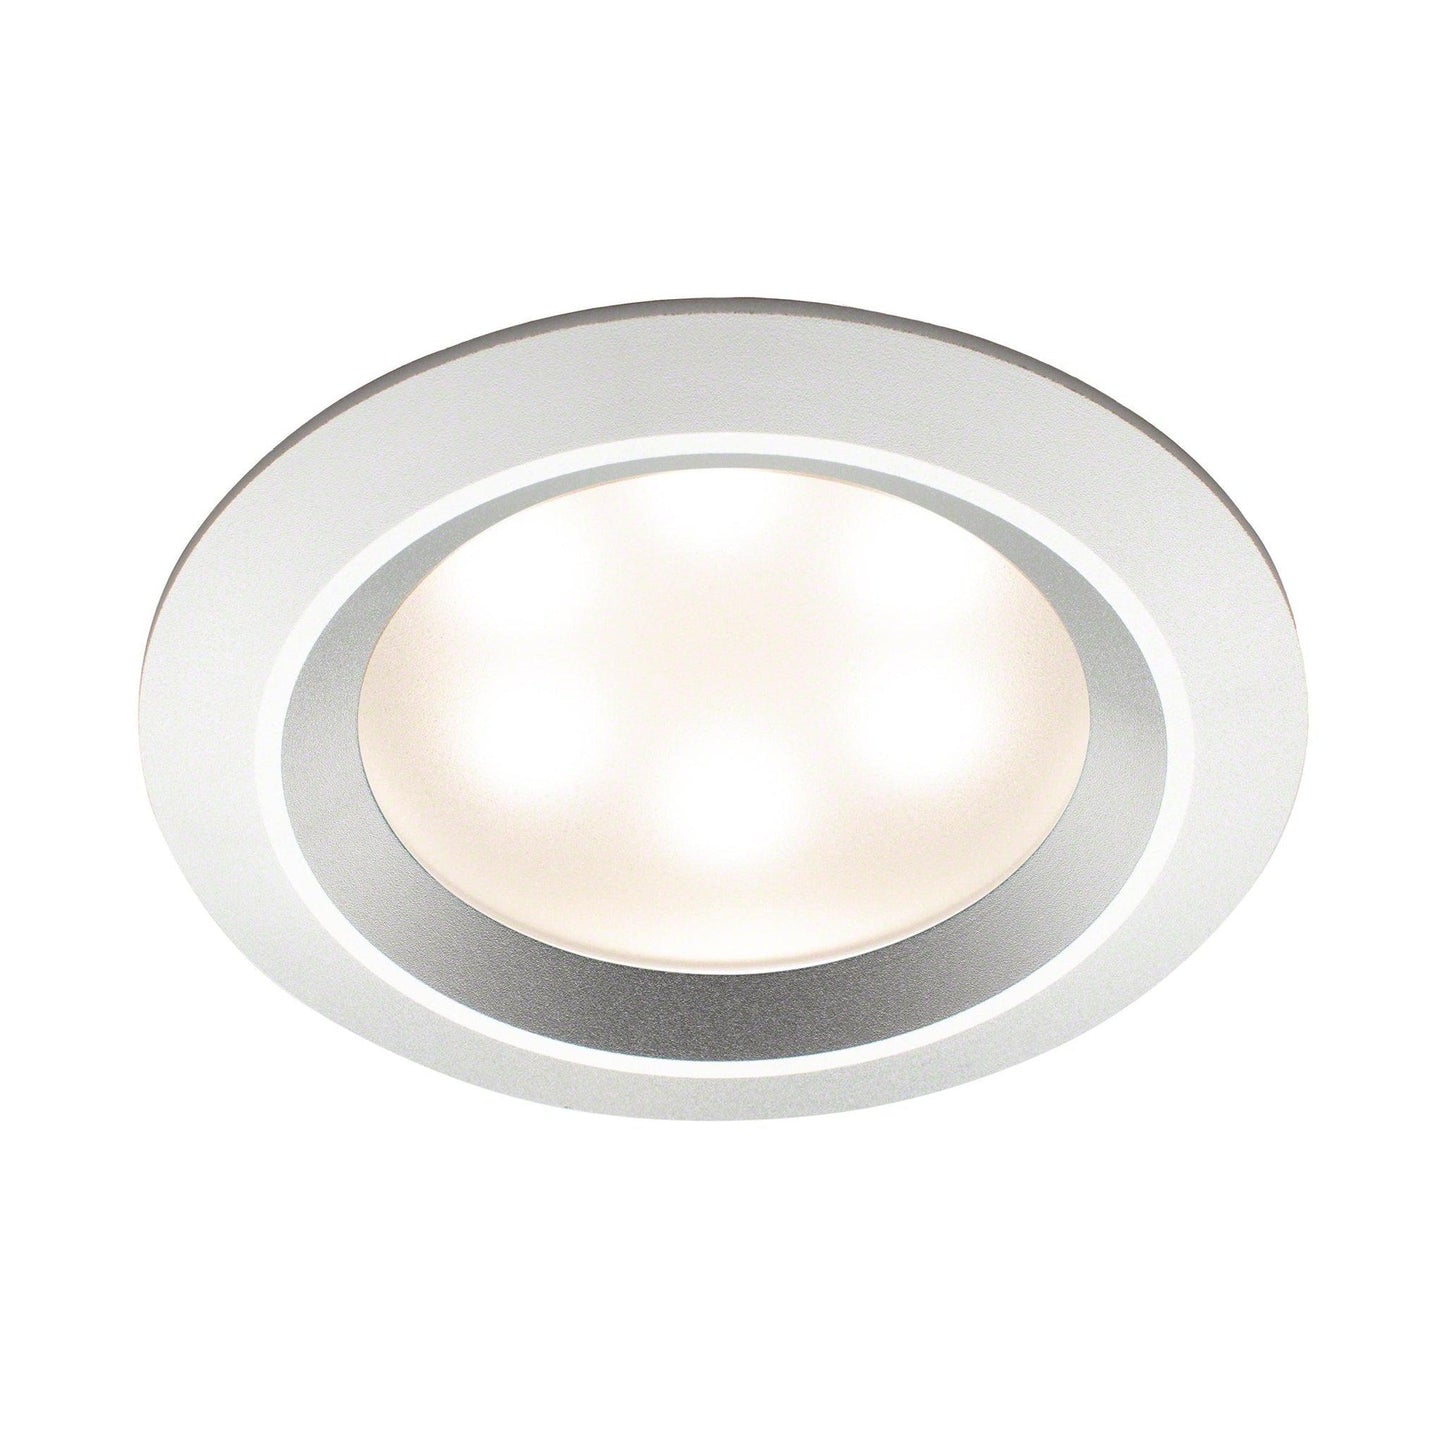 MrSteam Recessed Light 27" x 4" x 3" With 120 V LED Driver in Polished Aluminum